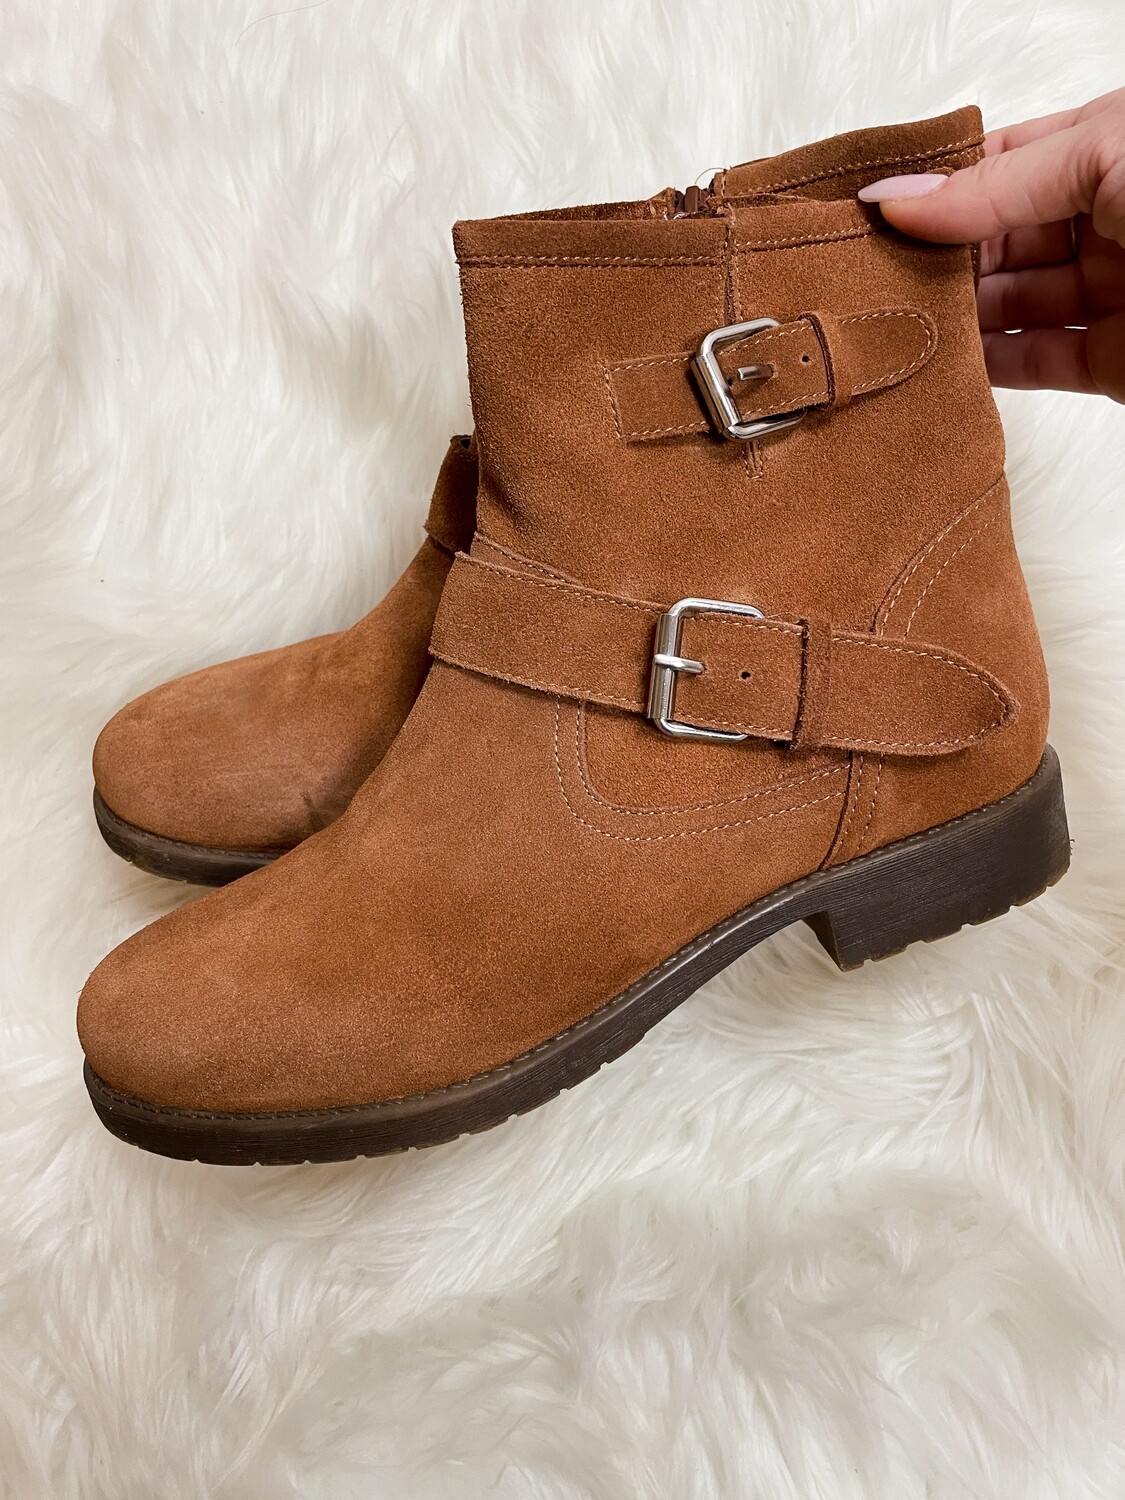 Steve Madden Brown Double Buckle Boots - Size 10